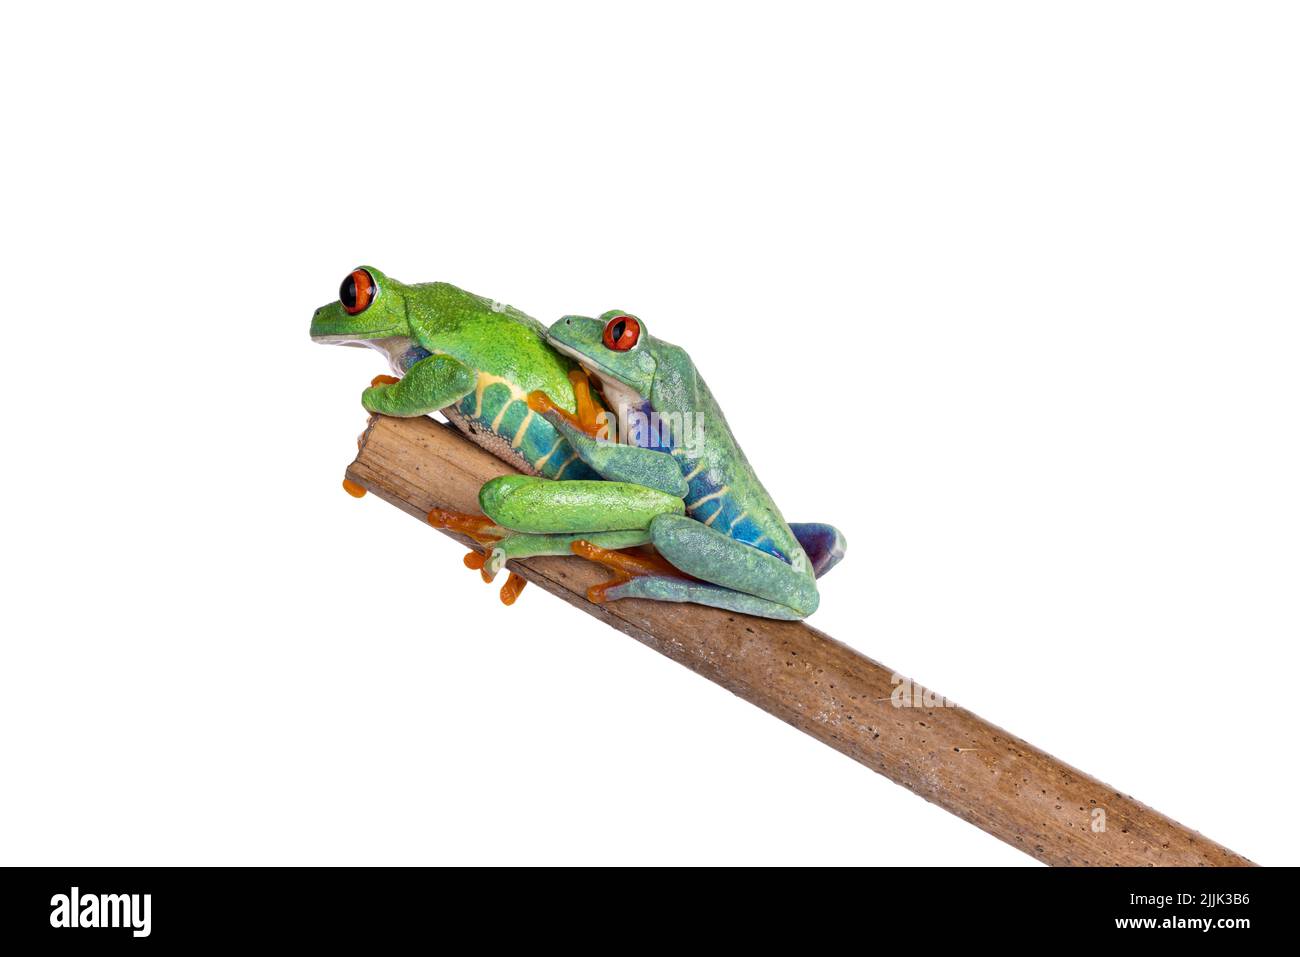 Two Red-eyed tree frogs aka Agalychnis callidryas, sitting on wooden stick holding each other. Looking away from camera. Isolated on a white backgroun Stock Photo